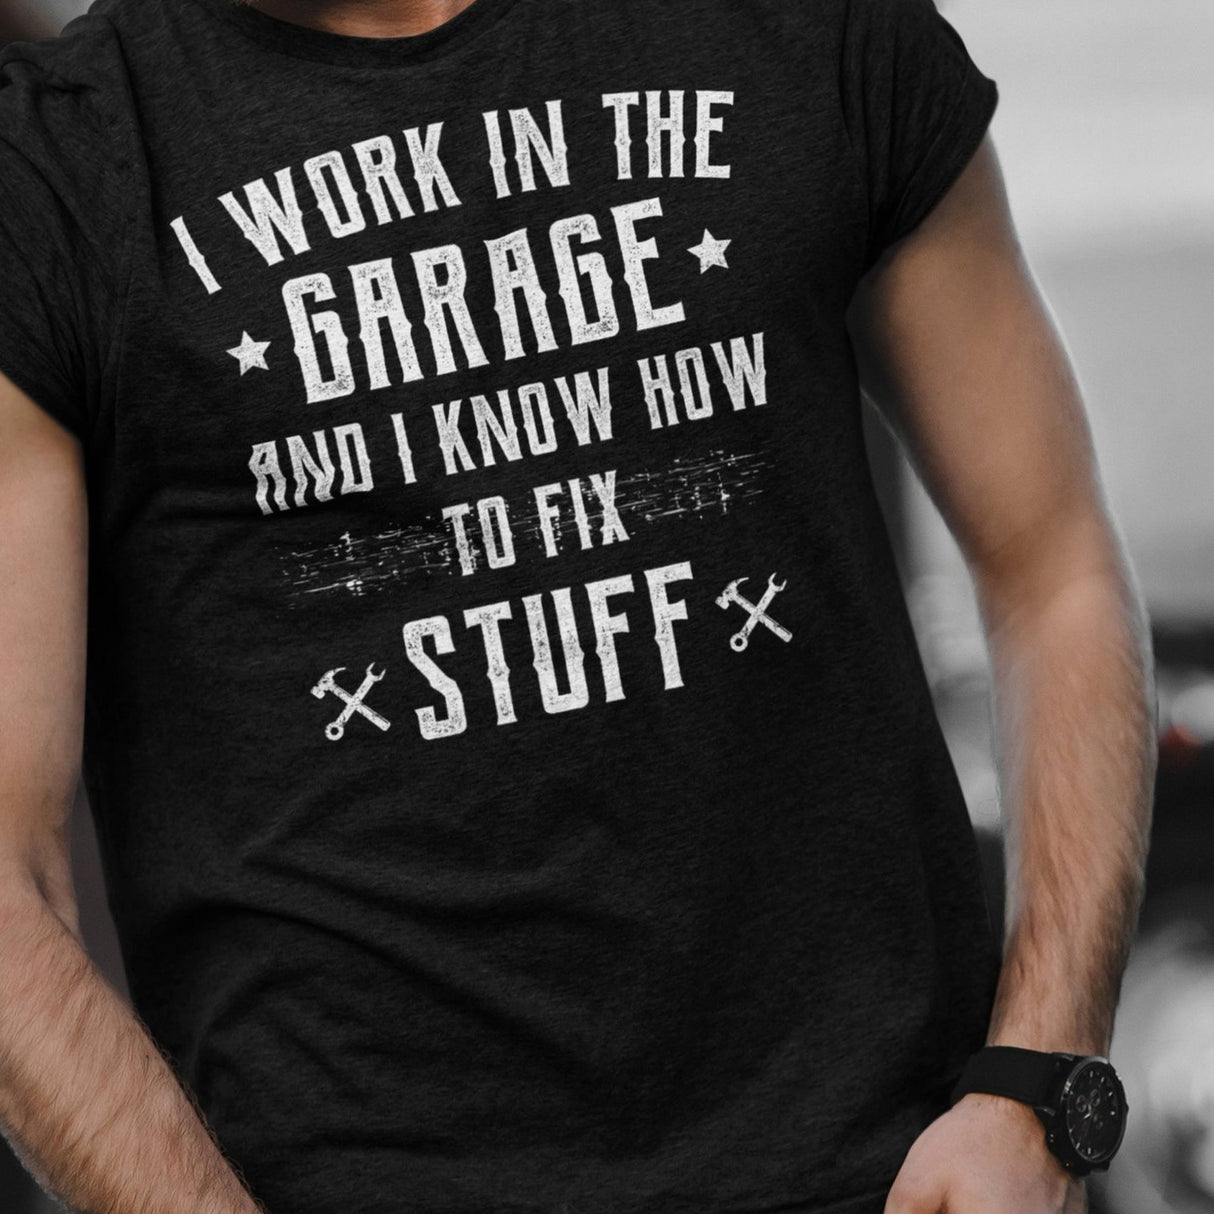 i-work-in-the-garage-and-i-know-how-to-fix-stuff-work-tee-garage-t-shirt-fix-stuff-tee-t-shirt-tee#color_black